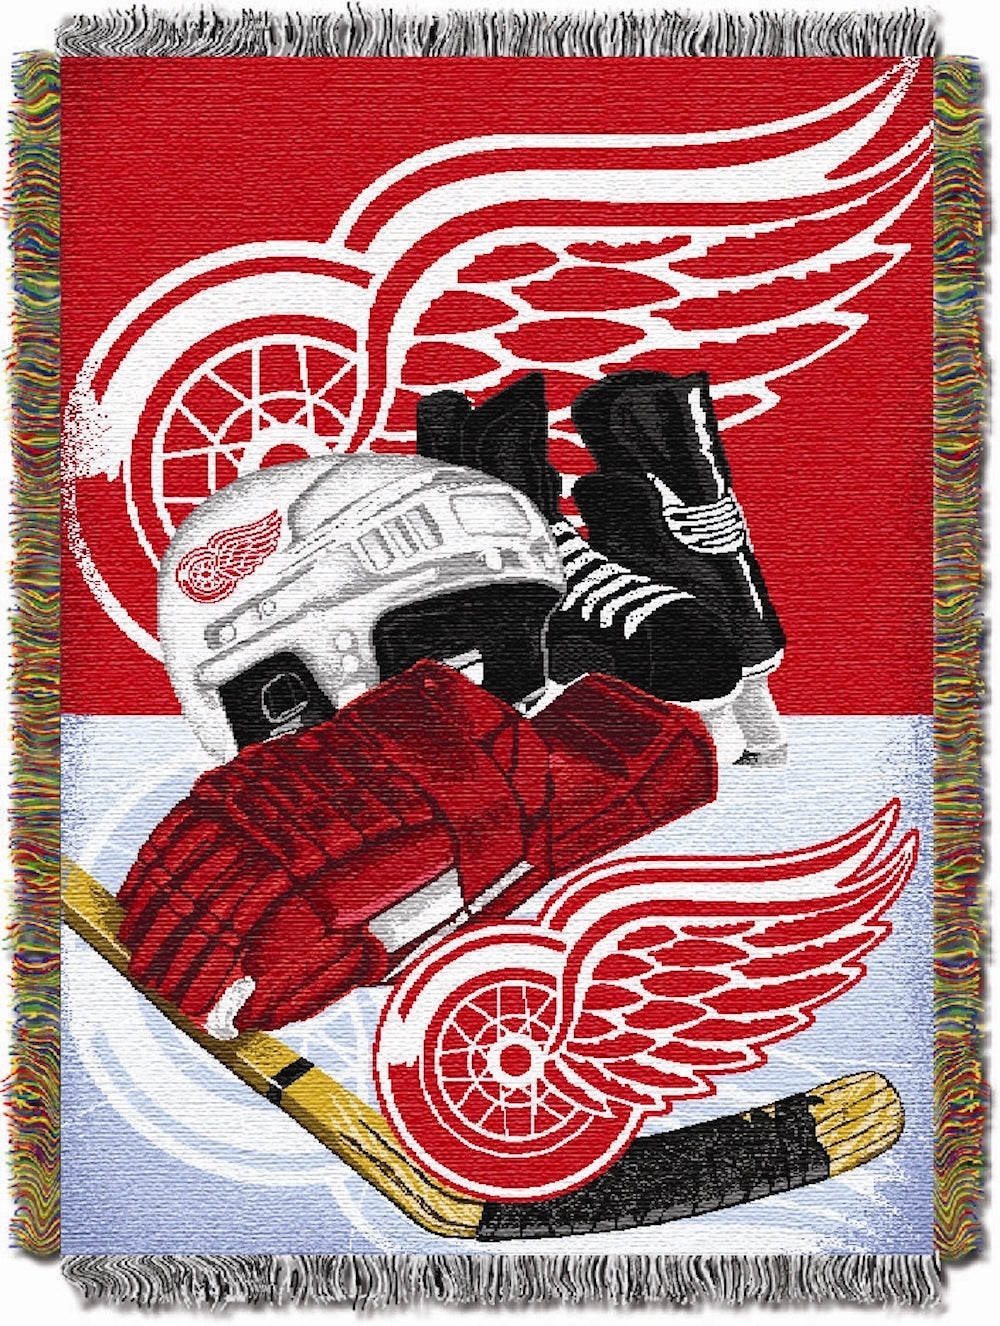 Detroit Red Wings woven home ice tapestry